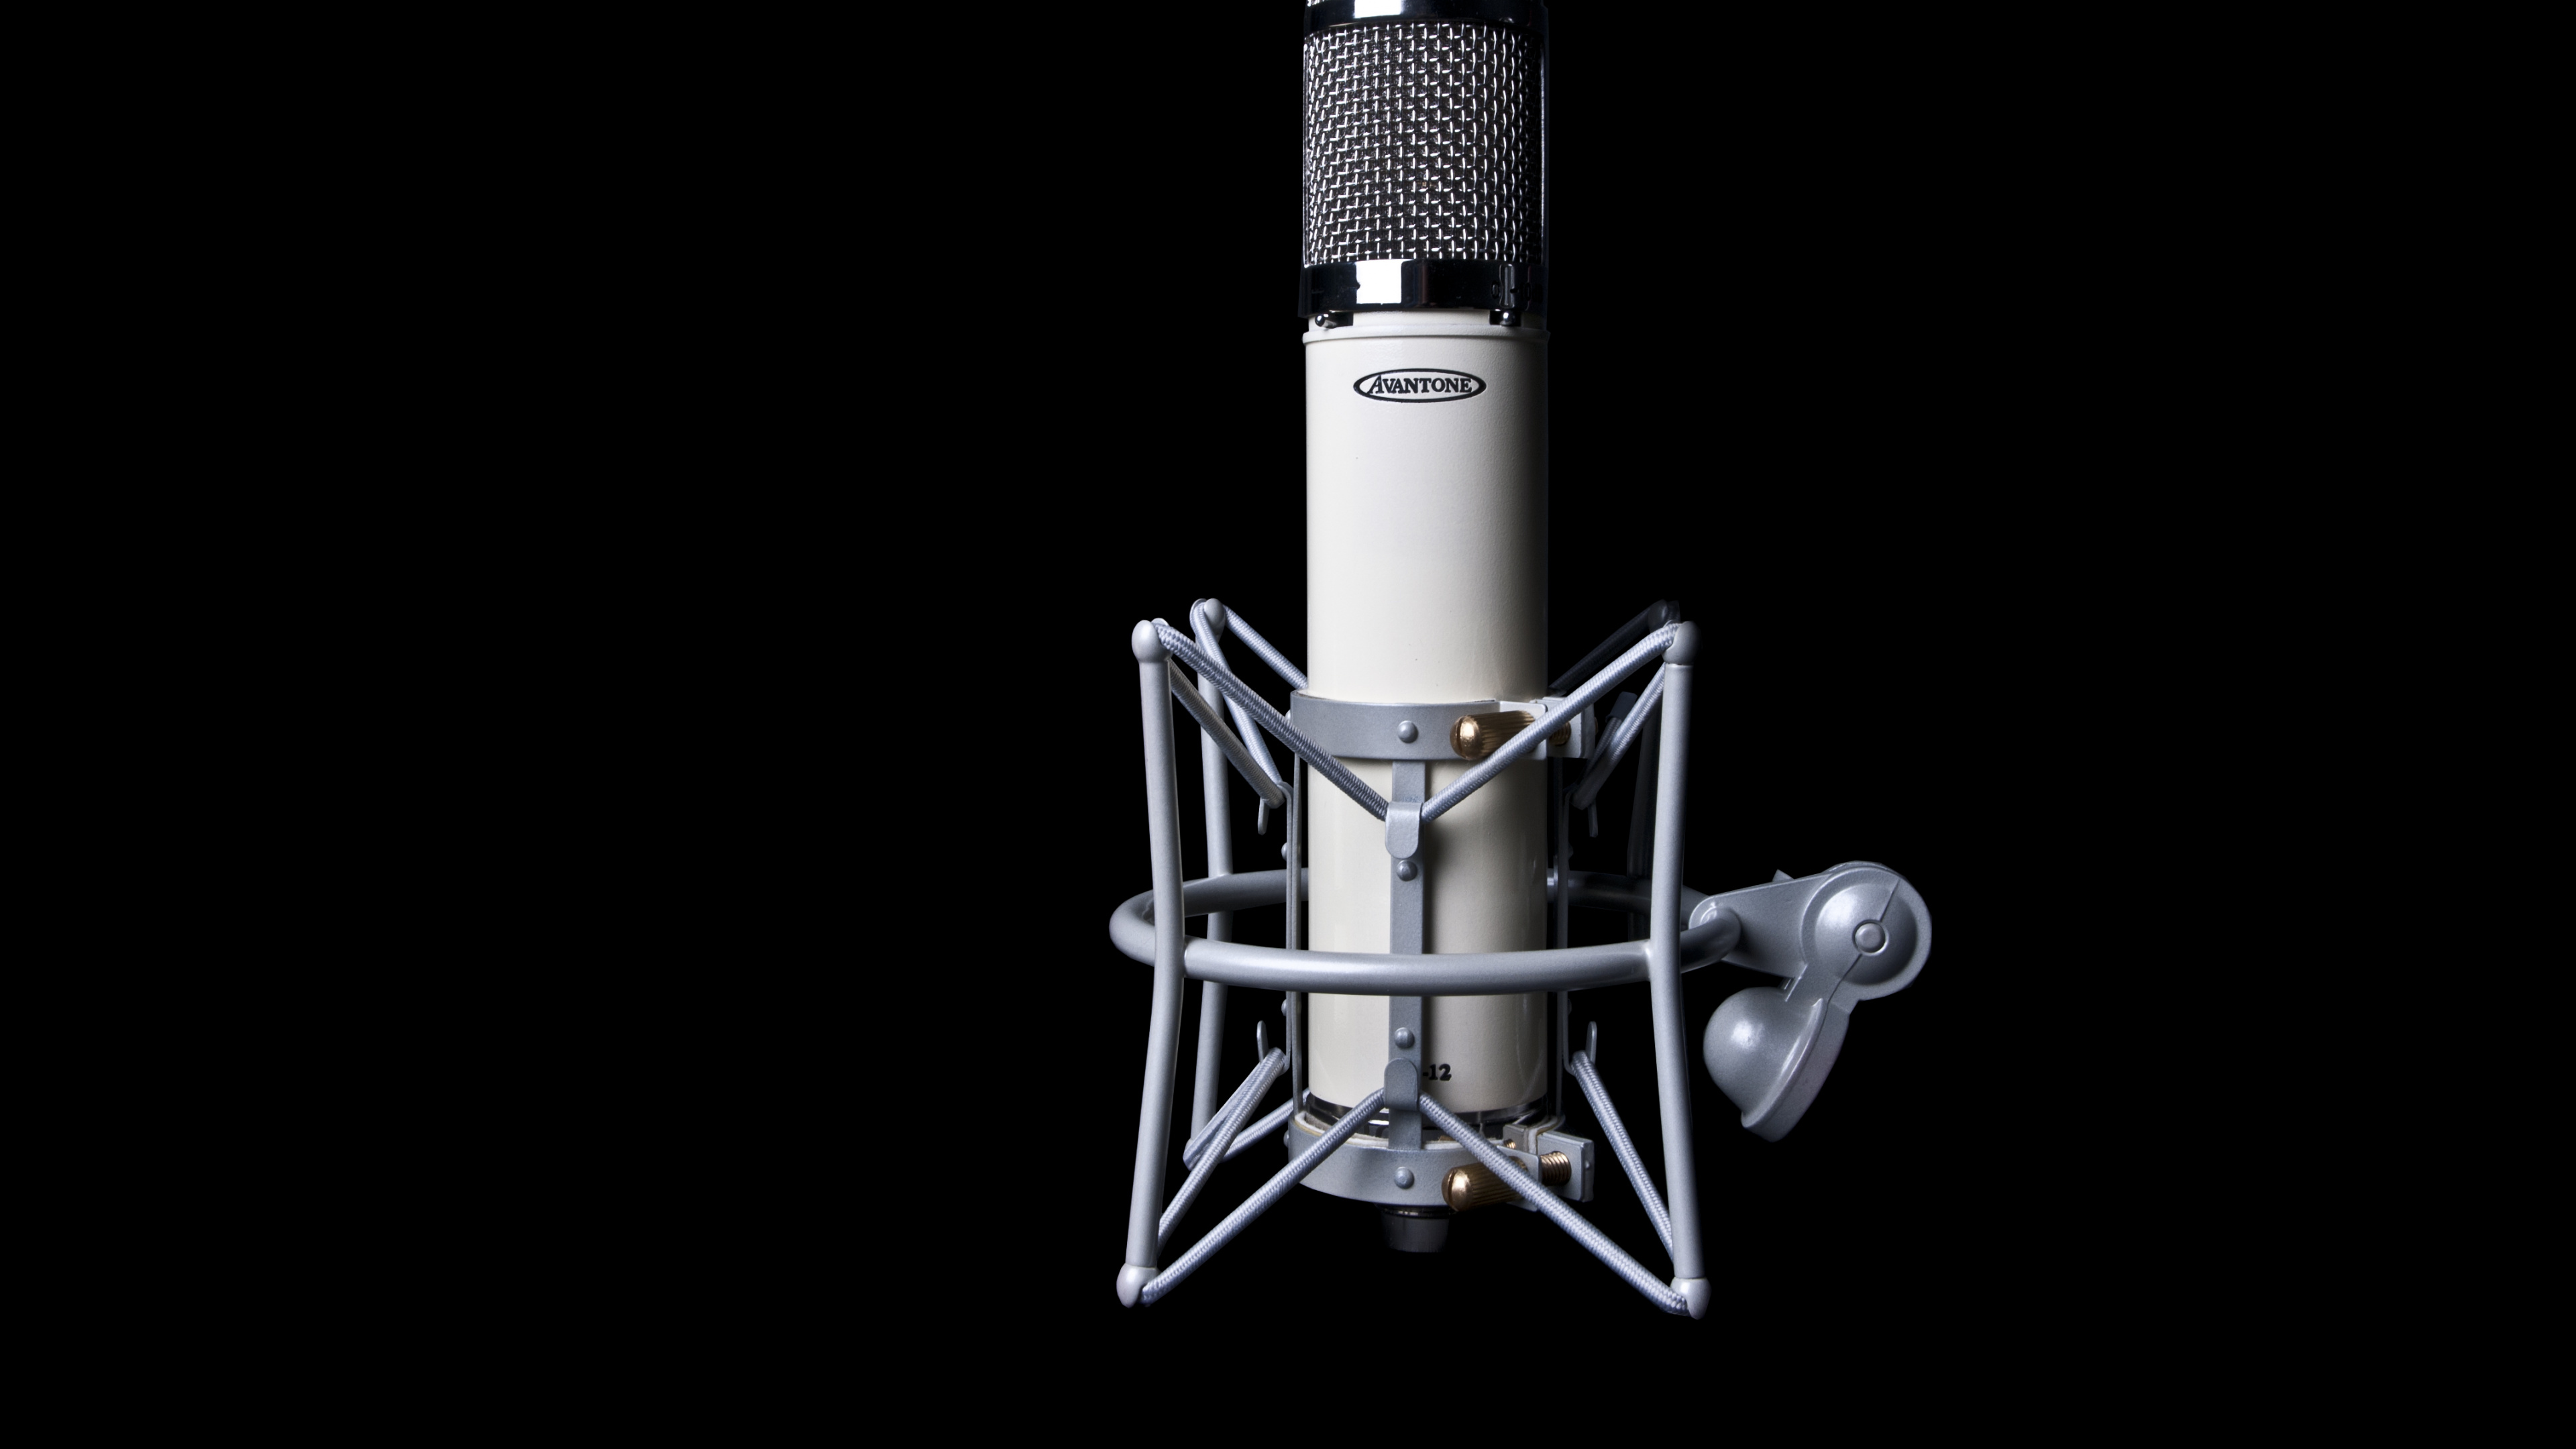 Black and Silver Condenser Microphone. Wallpaper in 3840x2160 Resolution